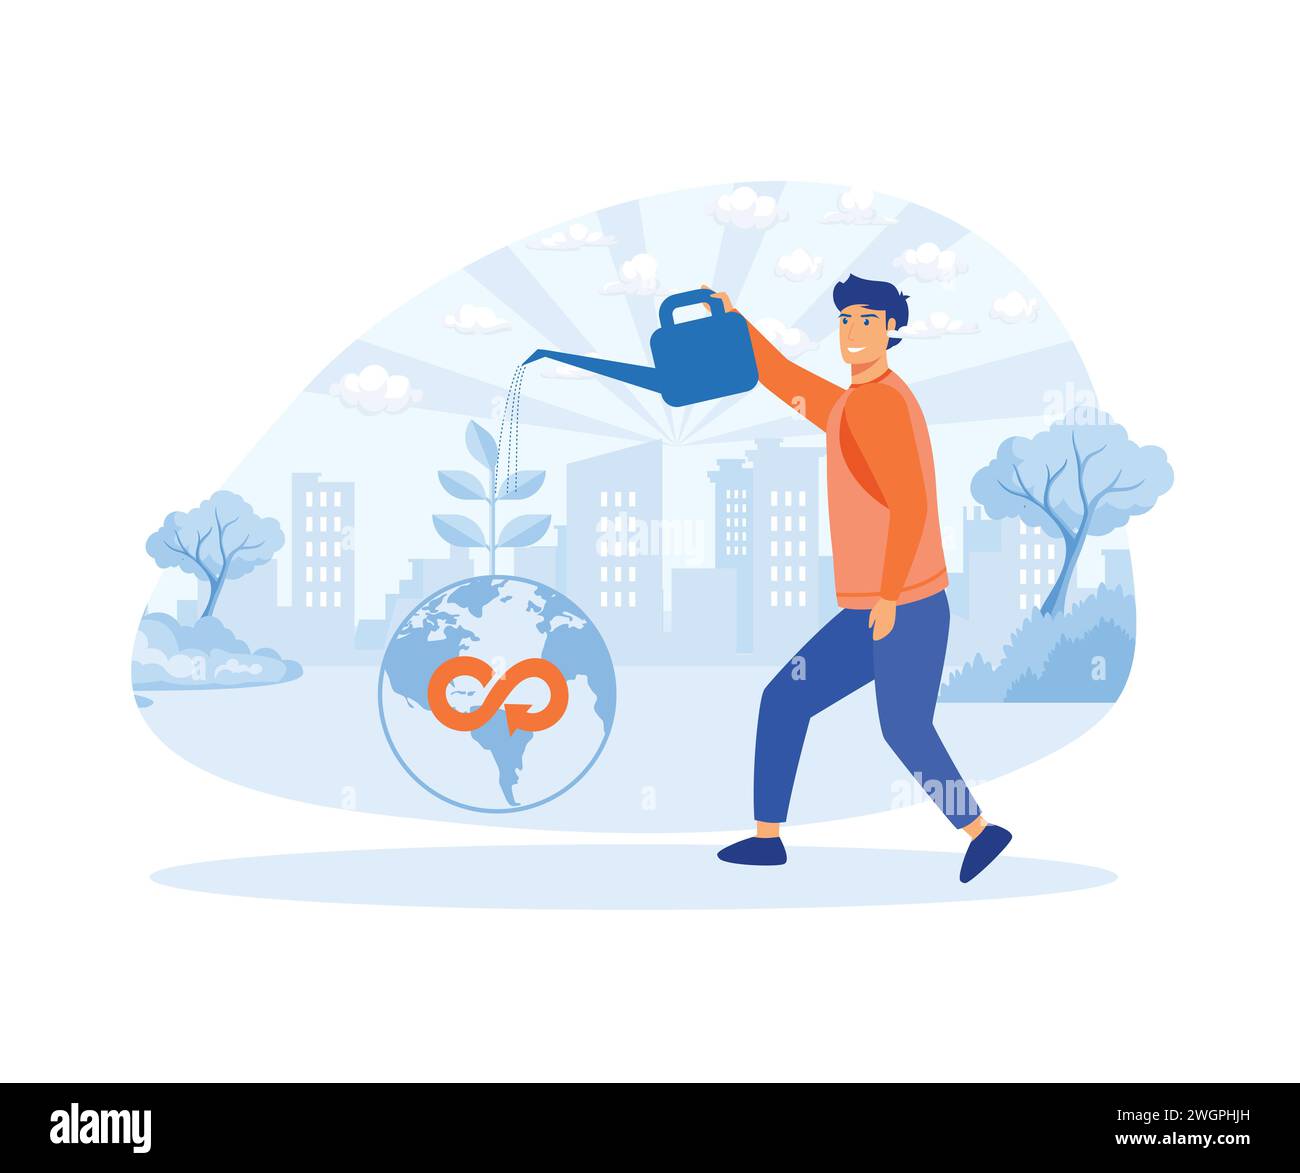 Circular economy concept. Man watering plants. Reduce carbon dioxide emissions and climate impacts. flat vector modern illustration Stock Vector